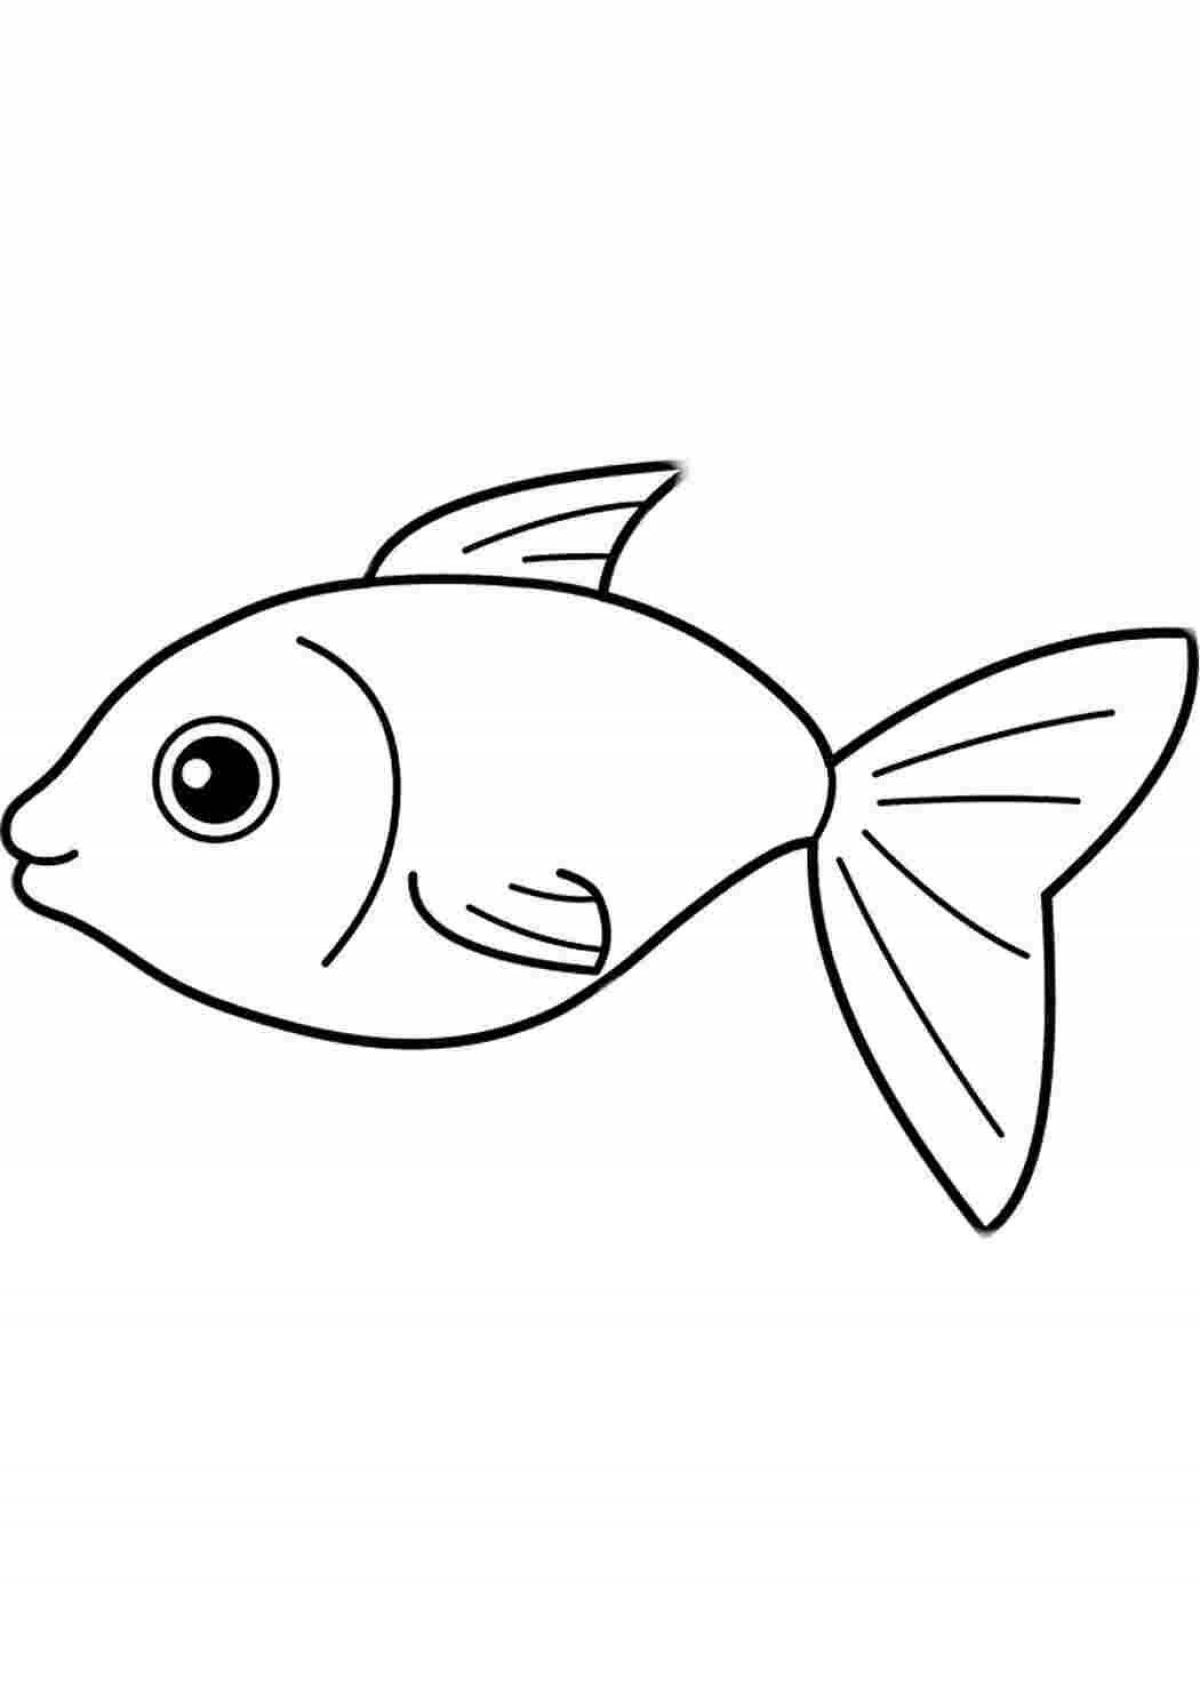 Simple fish coloring page animated